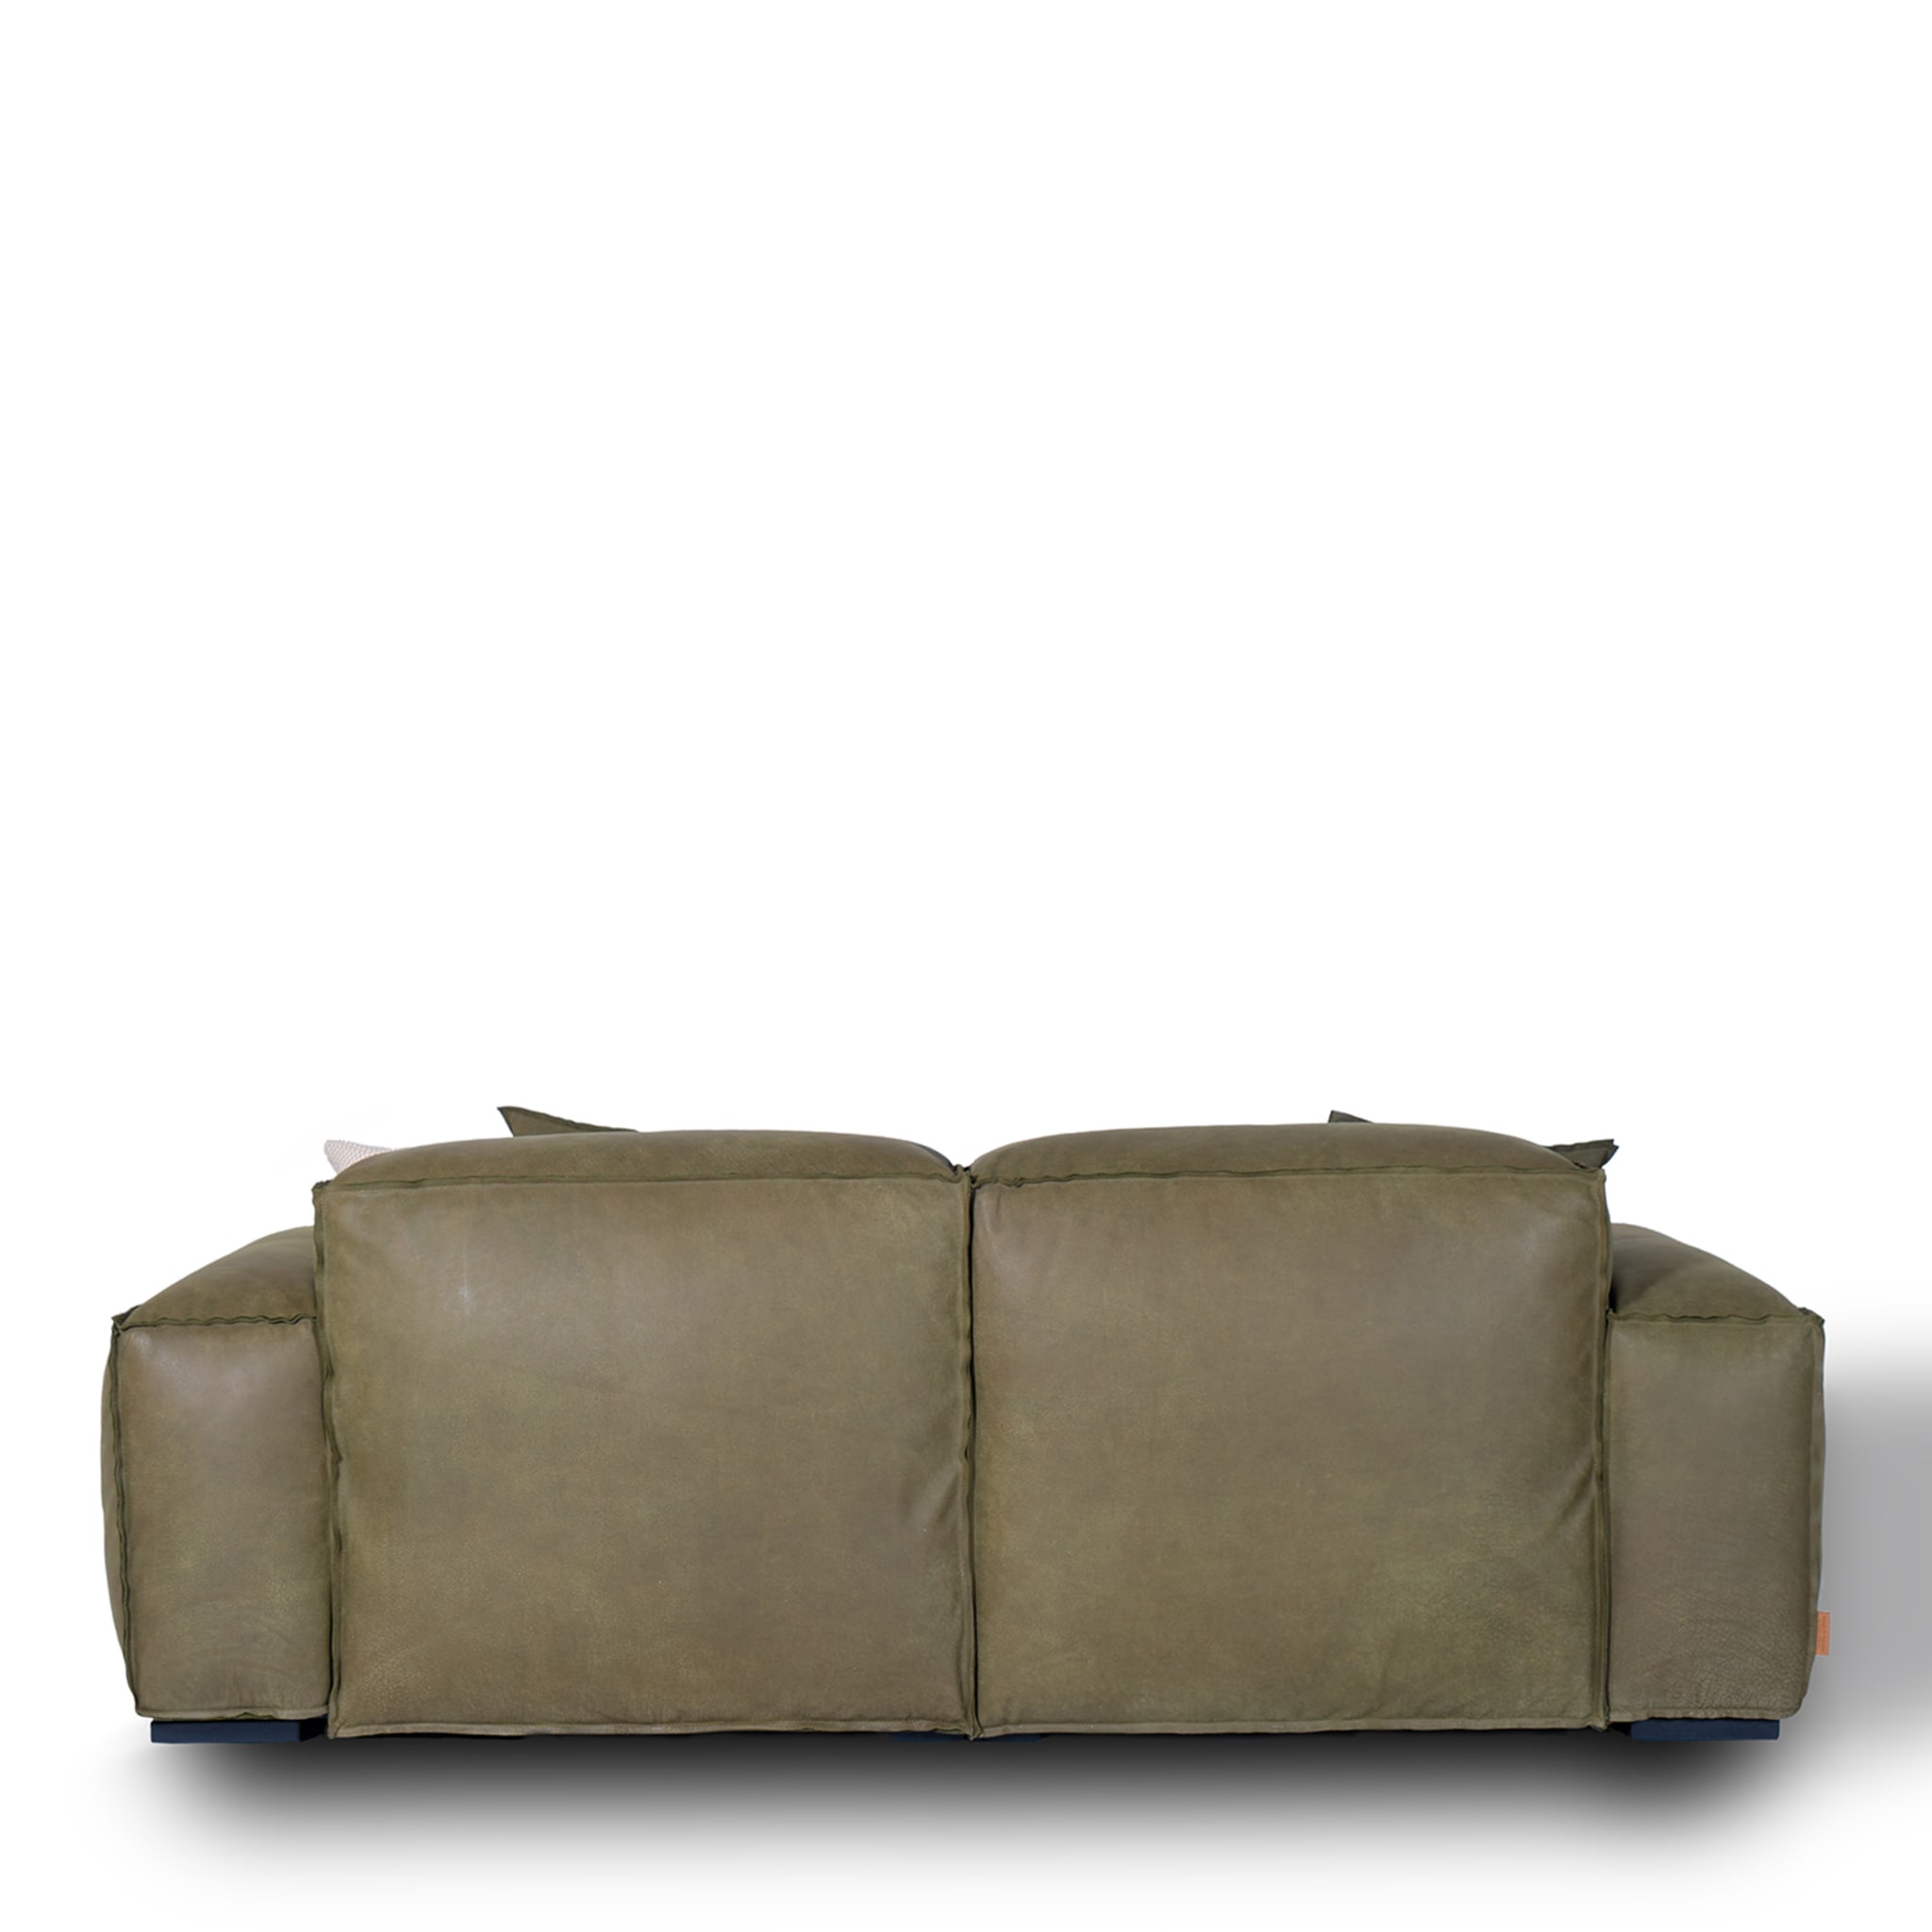 Placido Green Leather 2-Seater Maxi Sofa Tribeca collection - Alternative view 3